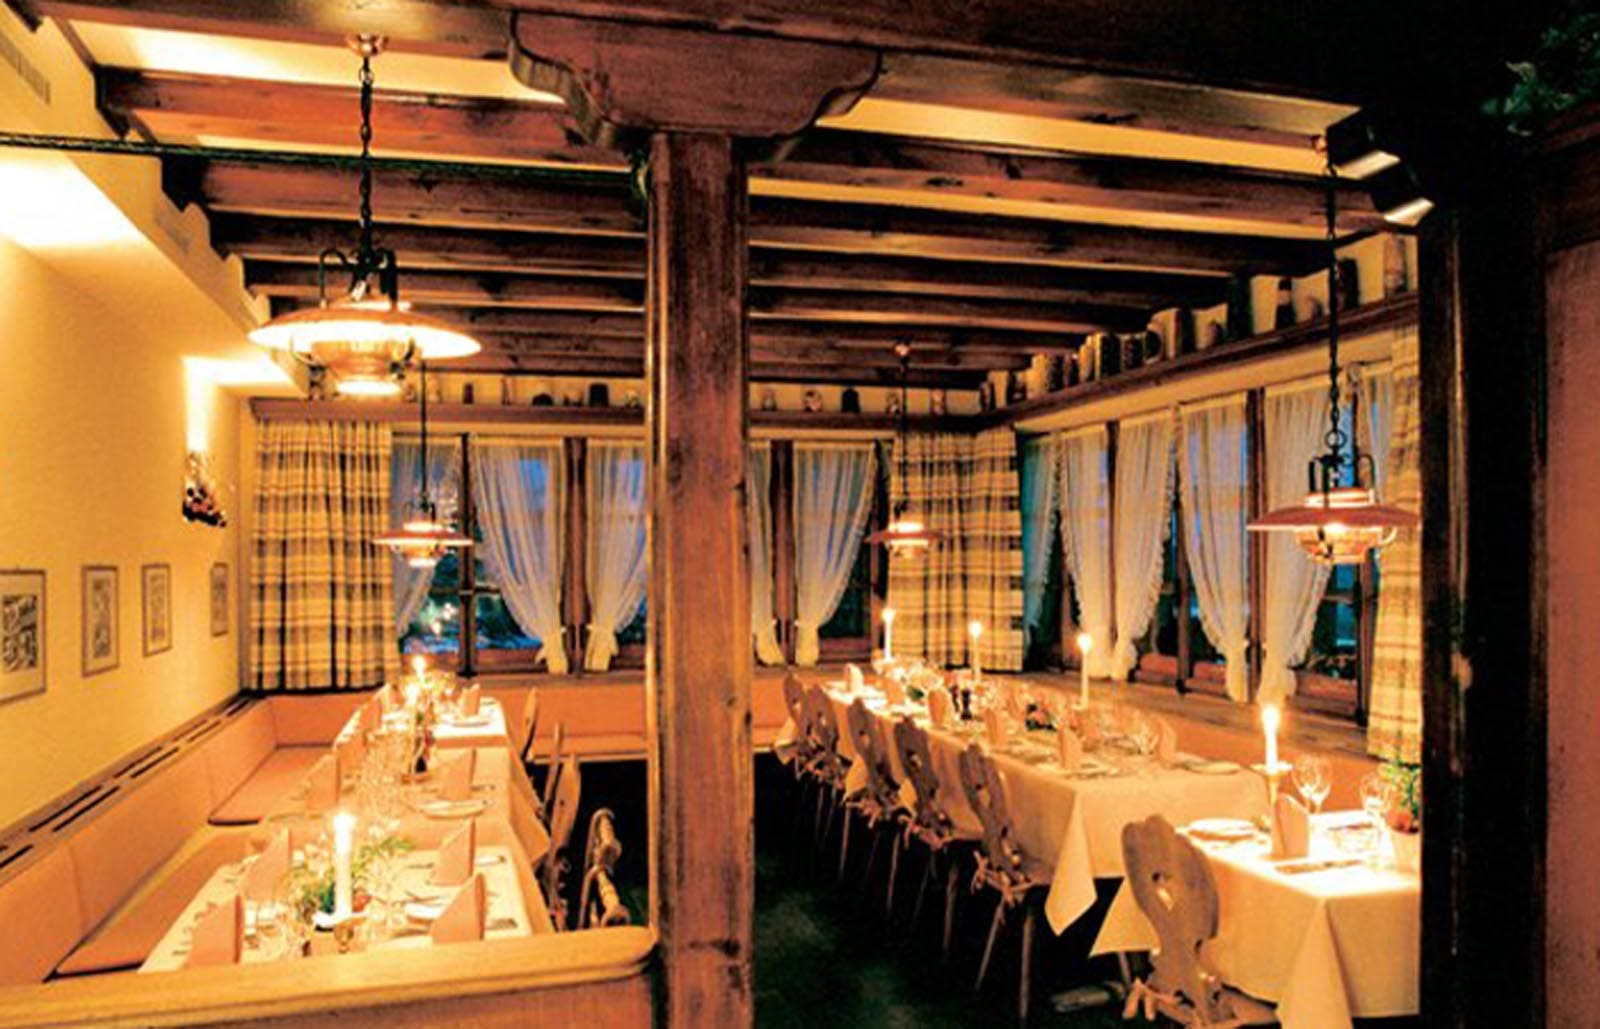 The dining room at Restaurant Chasellas in St. Moritz